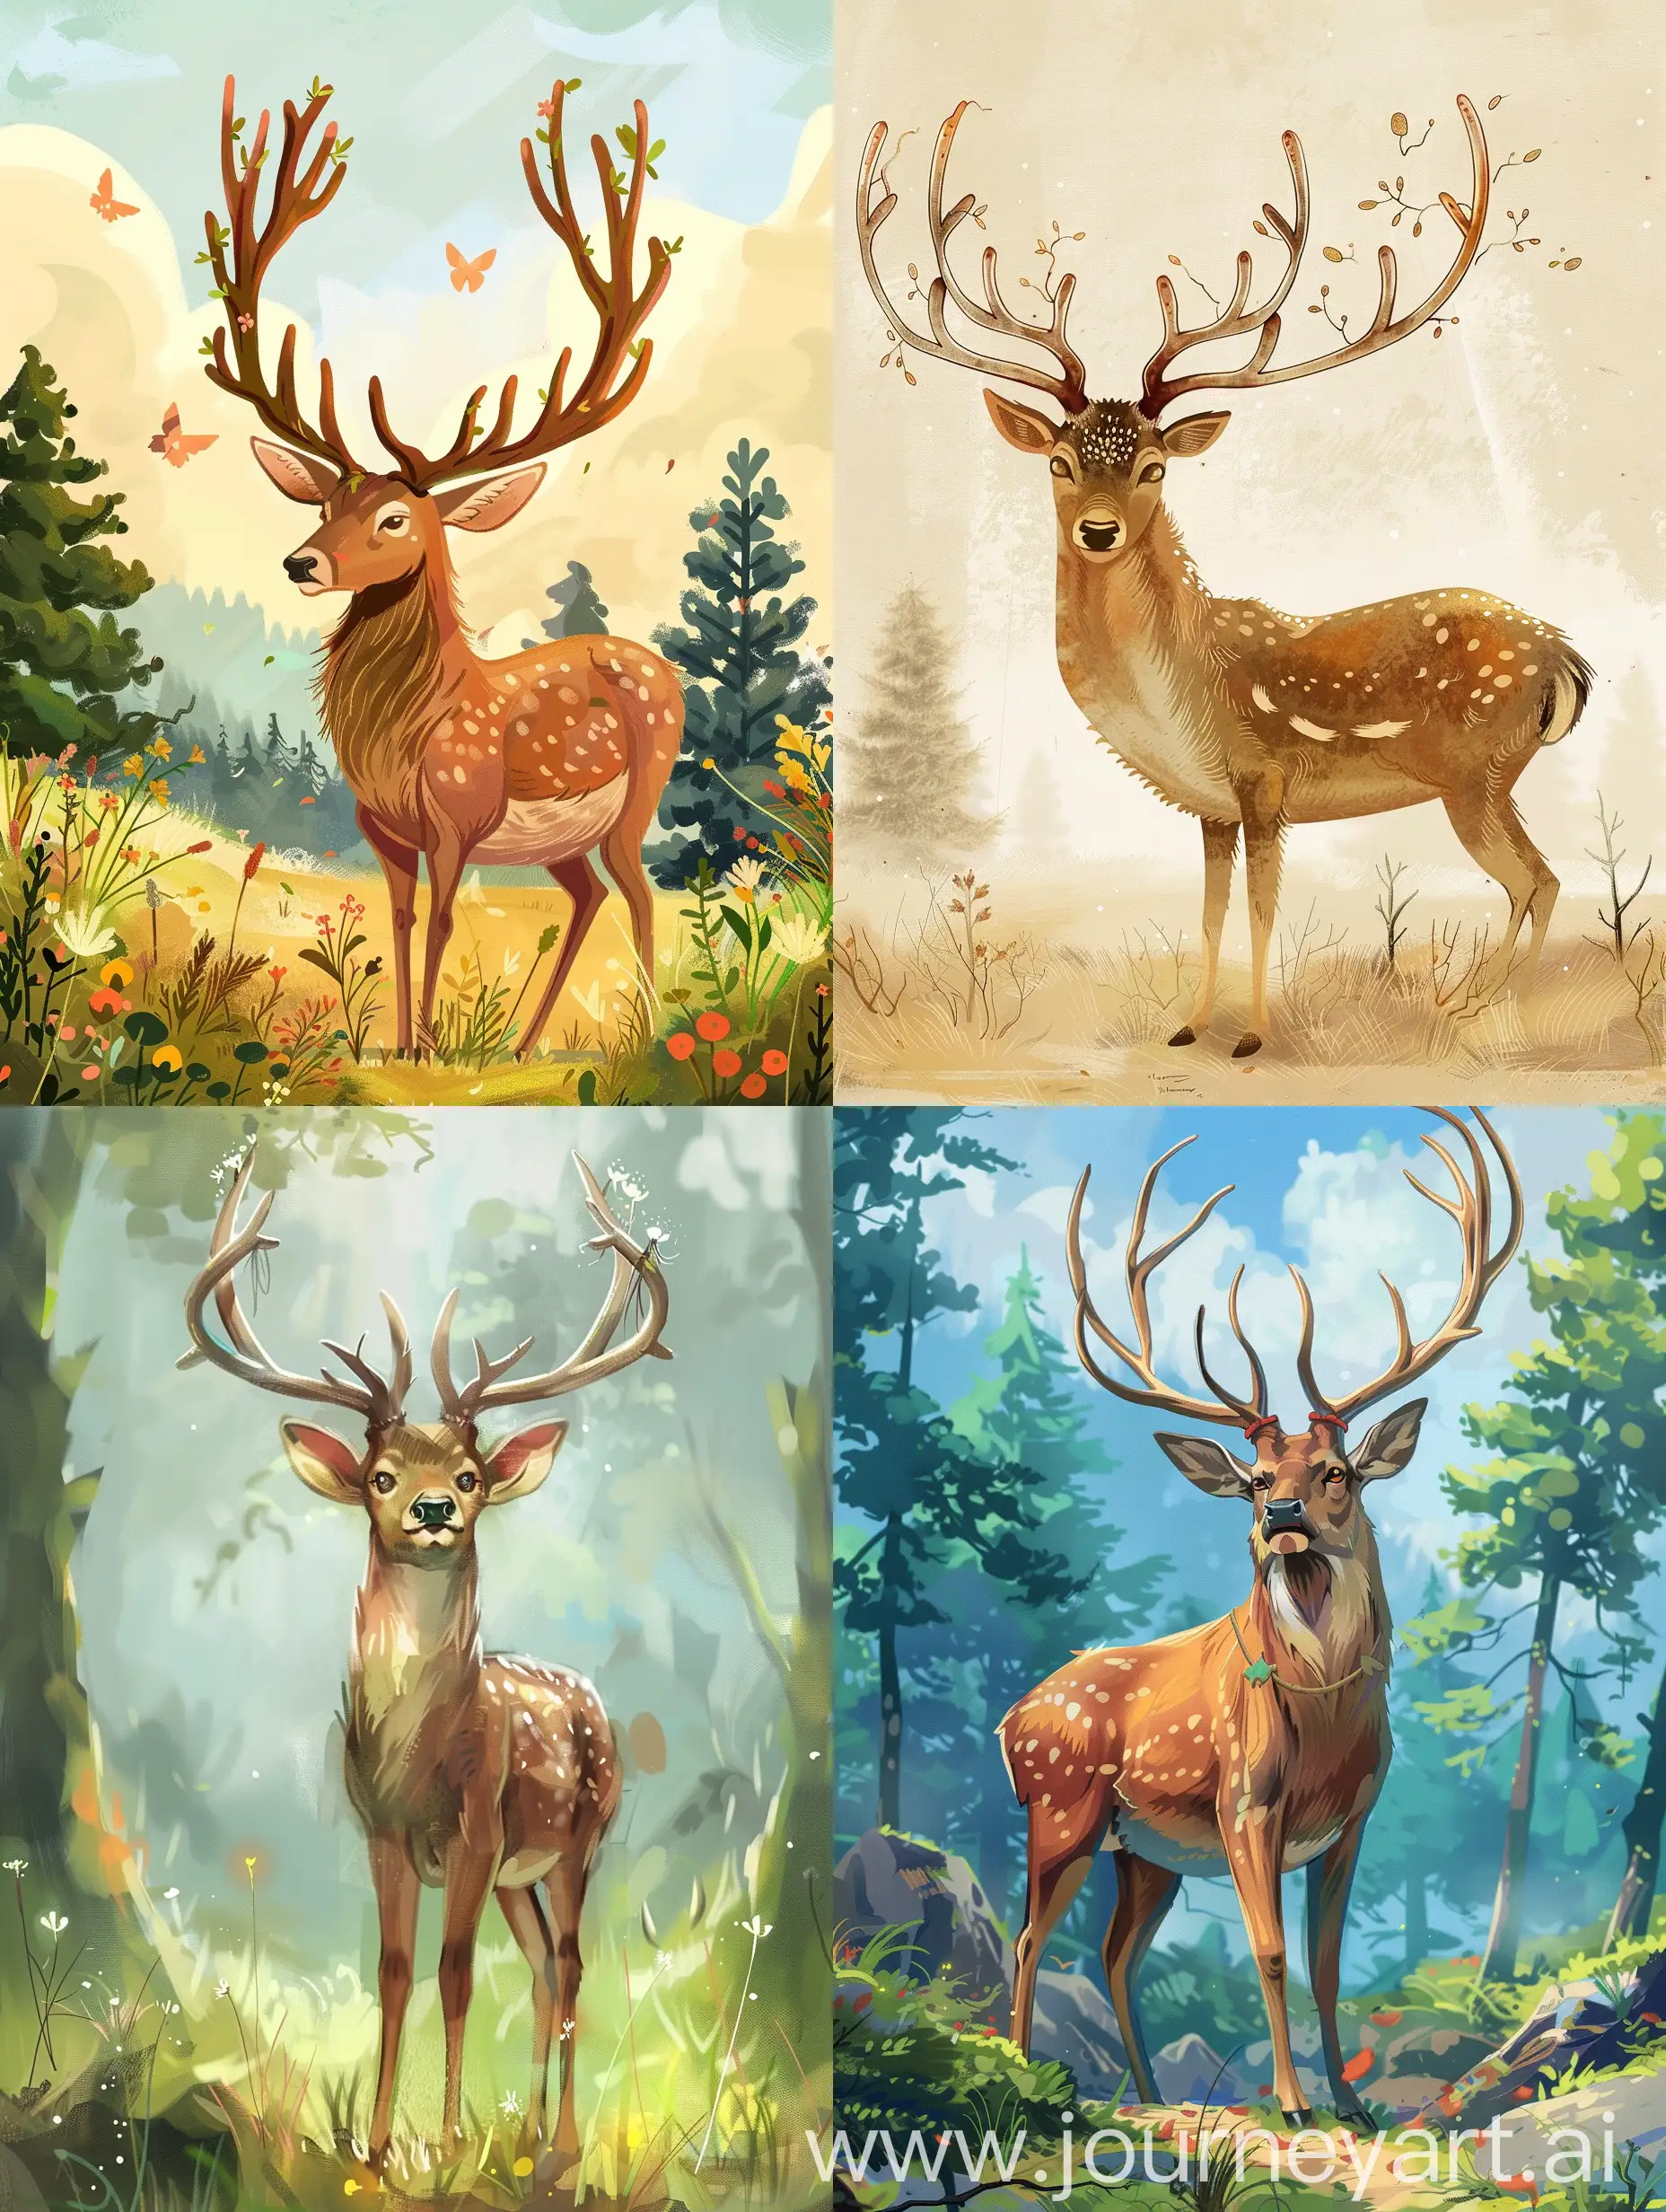 A fairytale illustration of a deer with big antlers.